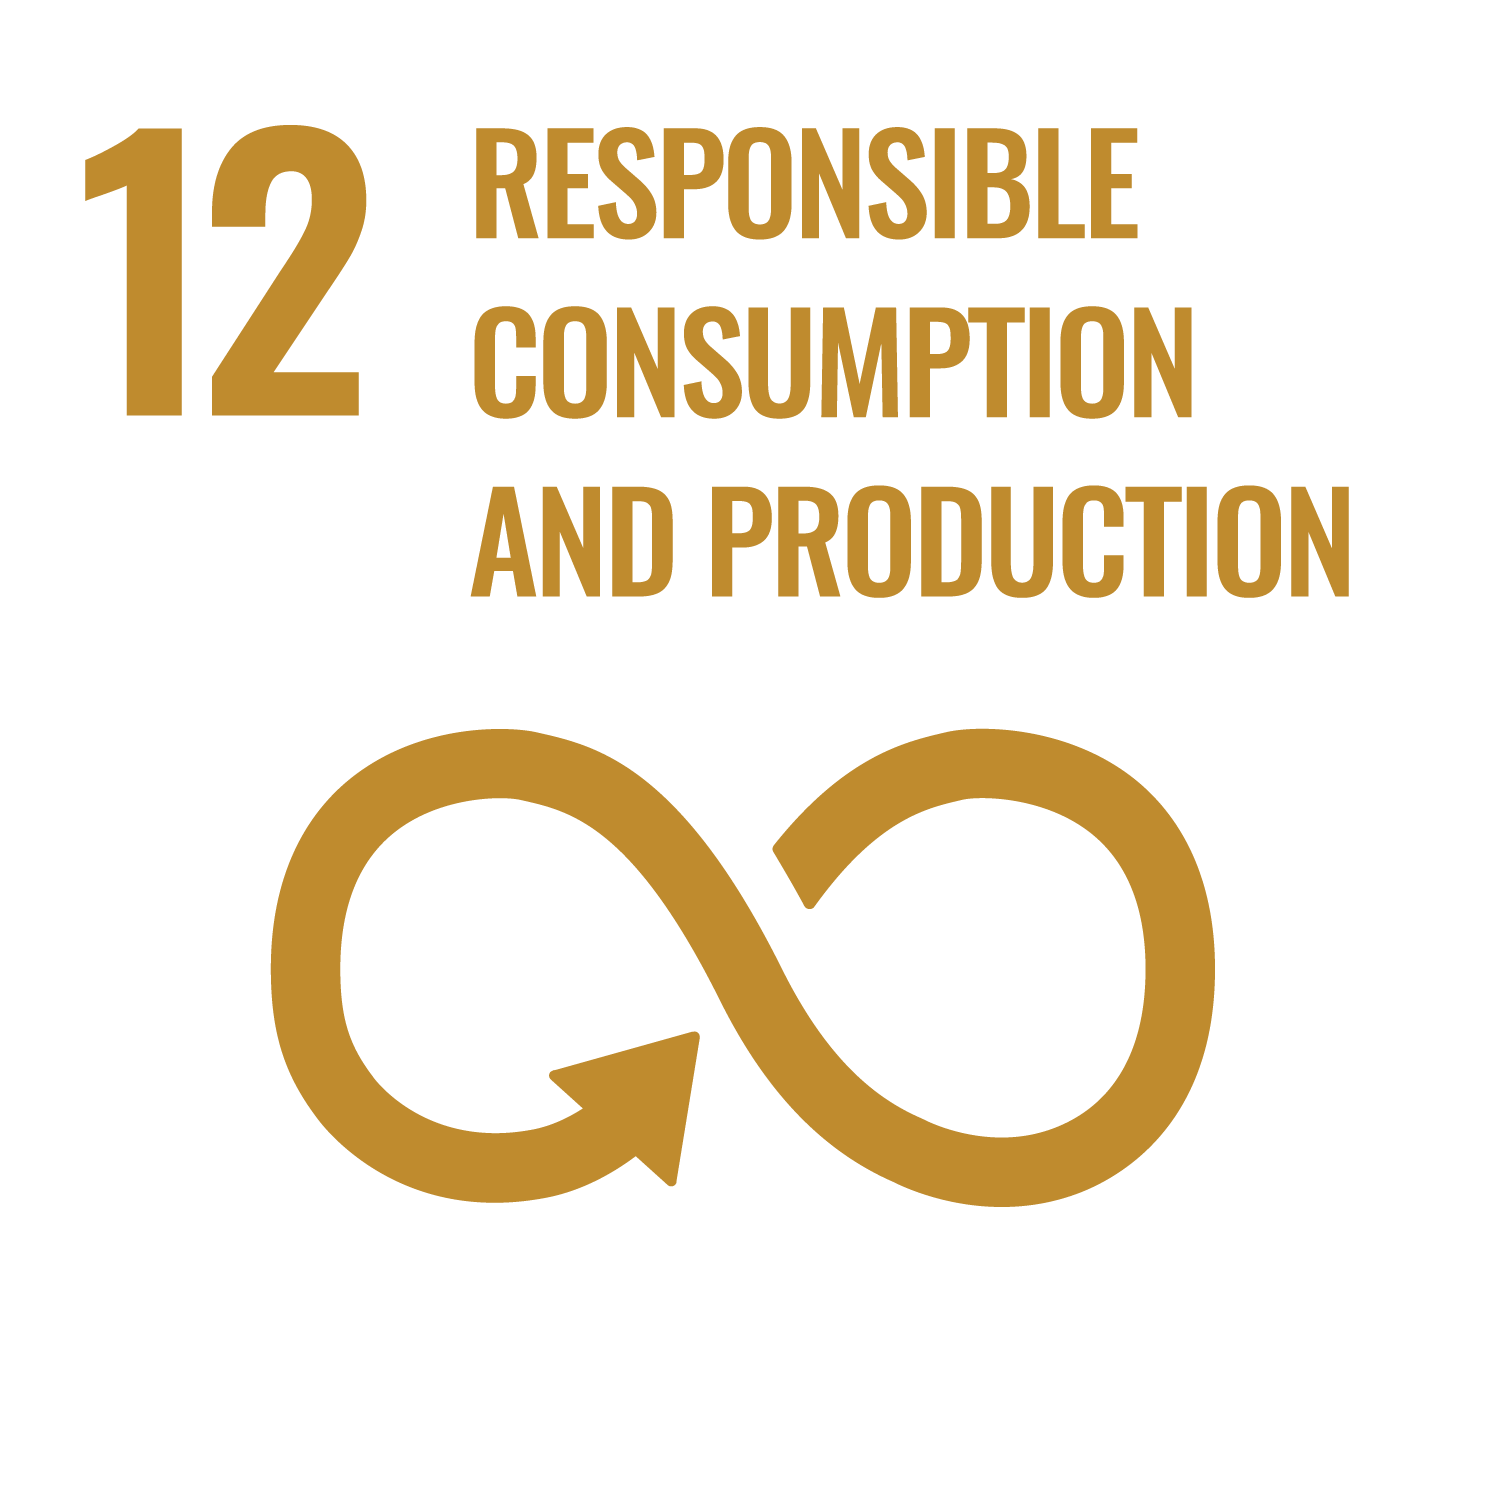 Image for Responsible Consumption and Production Sustainable Development Goal